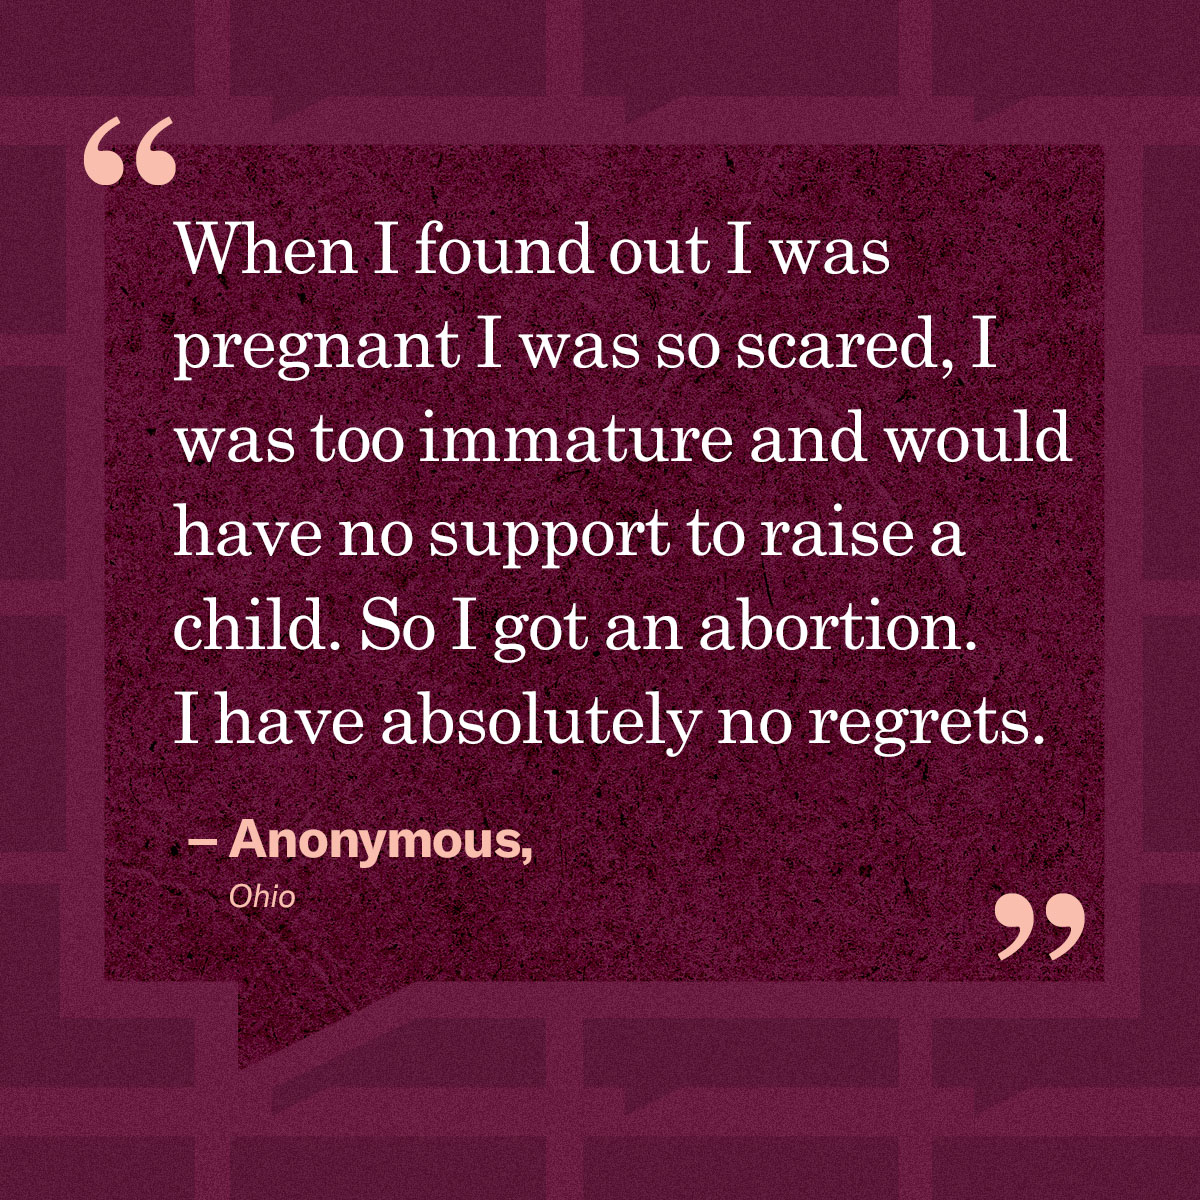 “When I found out I was pregnant I was so scared, I was too immature and would have no support to raise a child. So I got an abortion. I have absolutely no regrets.” – Anonymous, Ohio